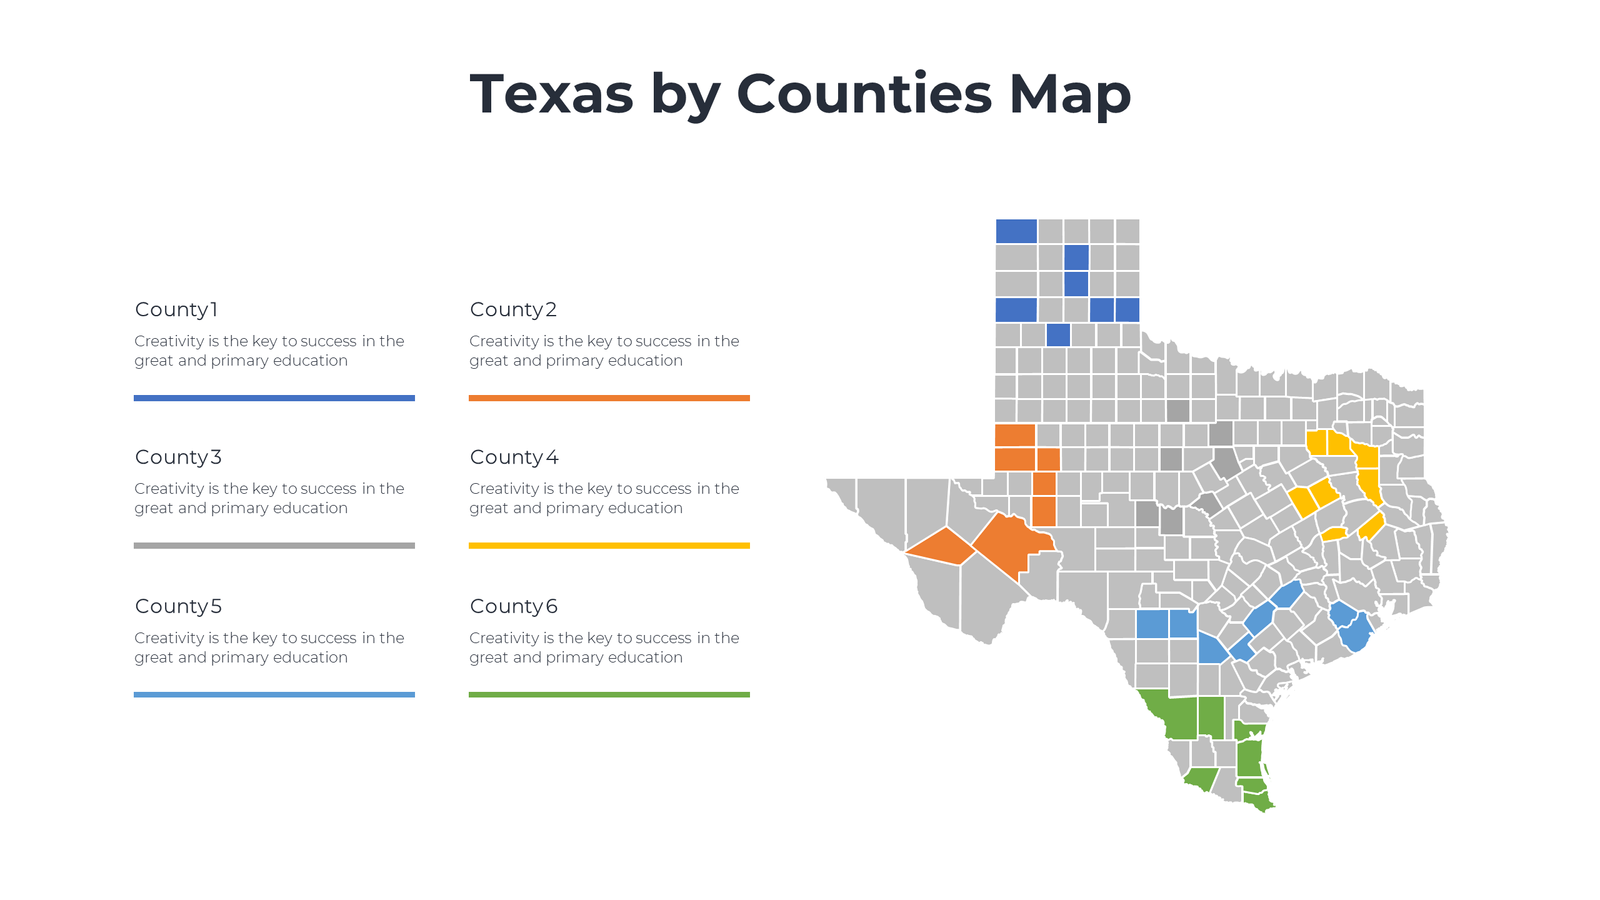 Texas by Counties Map